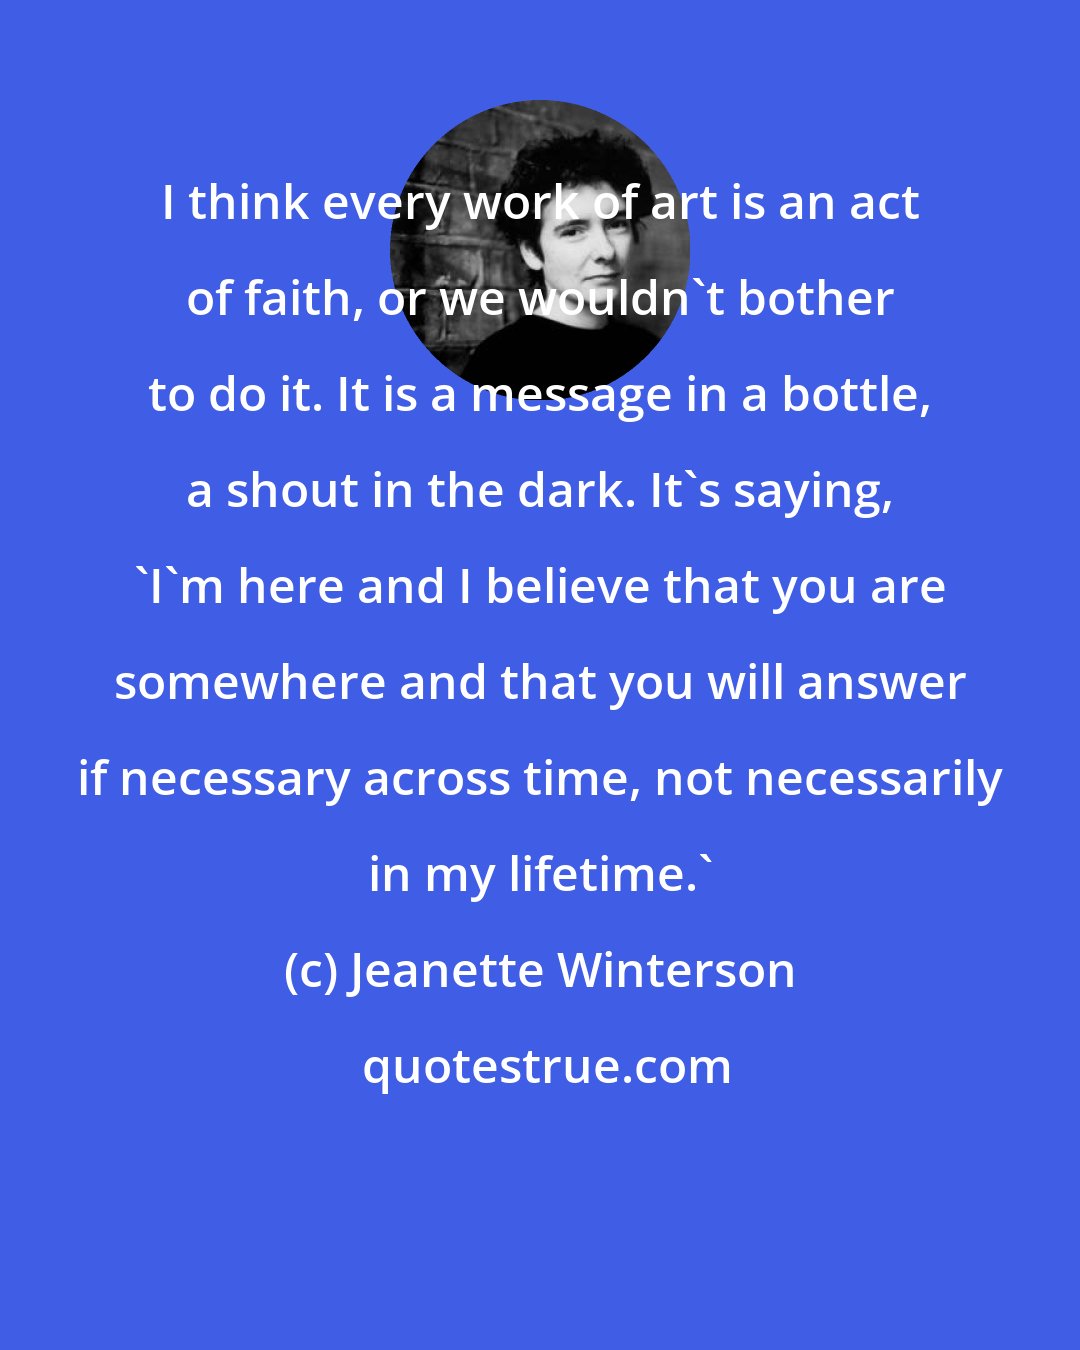 Jeanette Winterson: I think every work of art is an act of faith, or we wouldn't bother to do it. It is a message in a bottle, a shout in the dark. It's saying, 'I'm here and I believe that you are somewhere and that you will answer if necessary across time, not necessarily in my lifetime.'